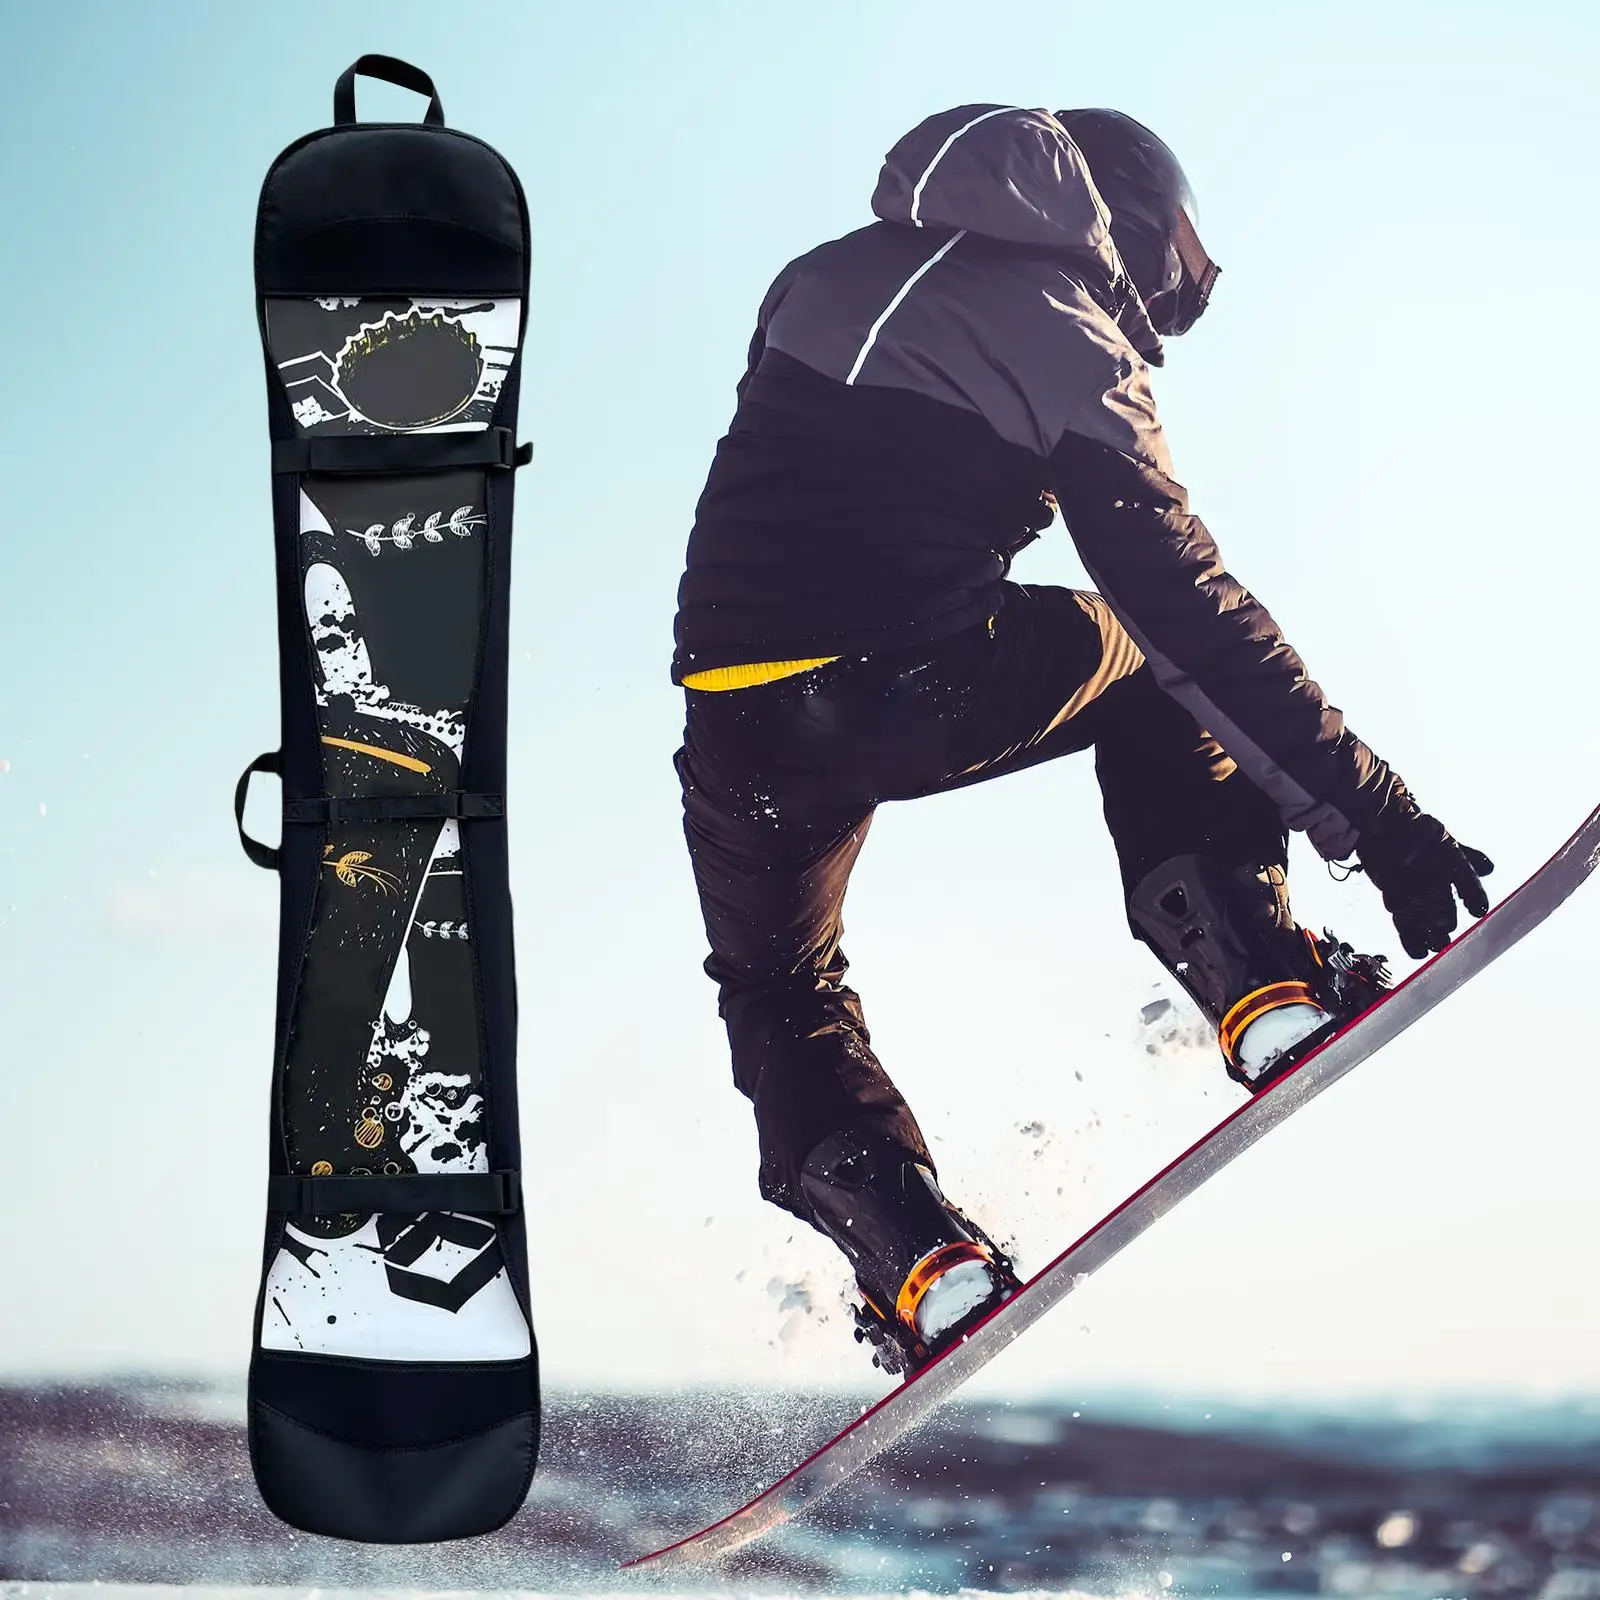 Skiing Snowboard Bag Adjustable Belt Zipper Portable Waterproof Accessories 163cm Cover for Winter Sports Travel Backpack